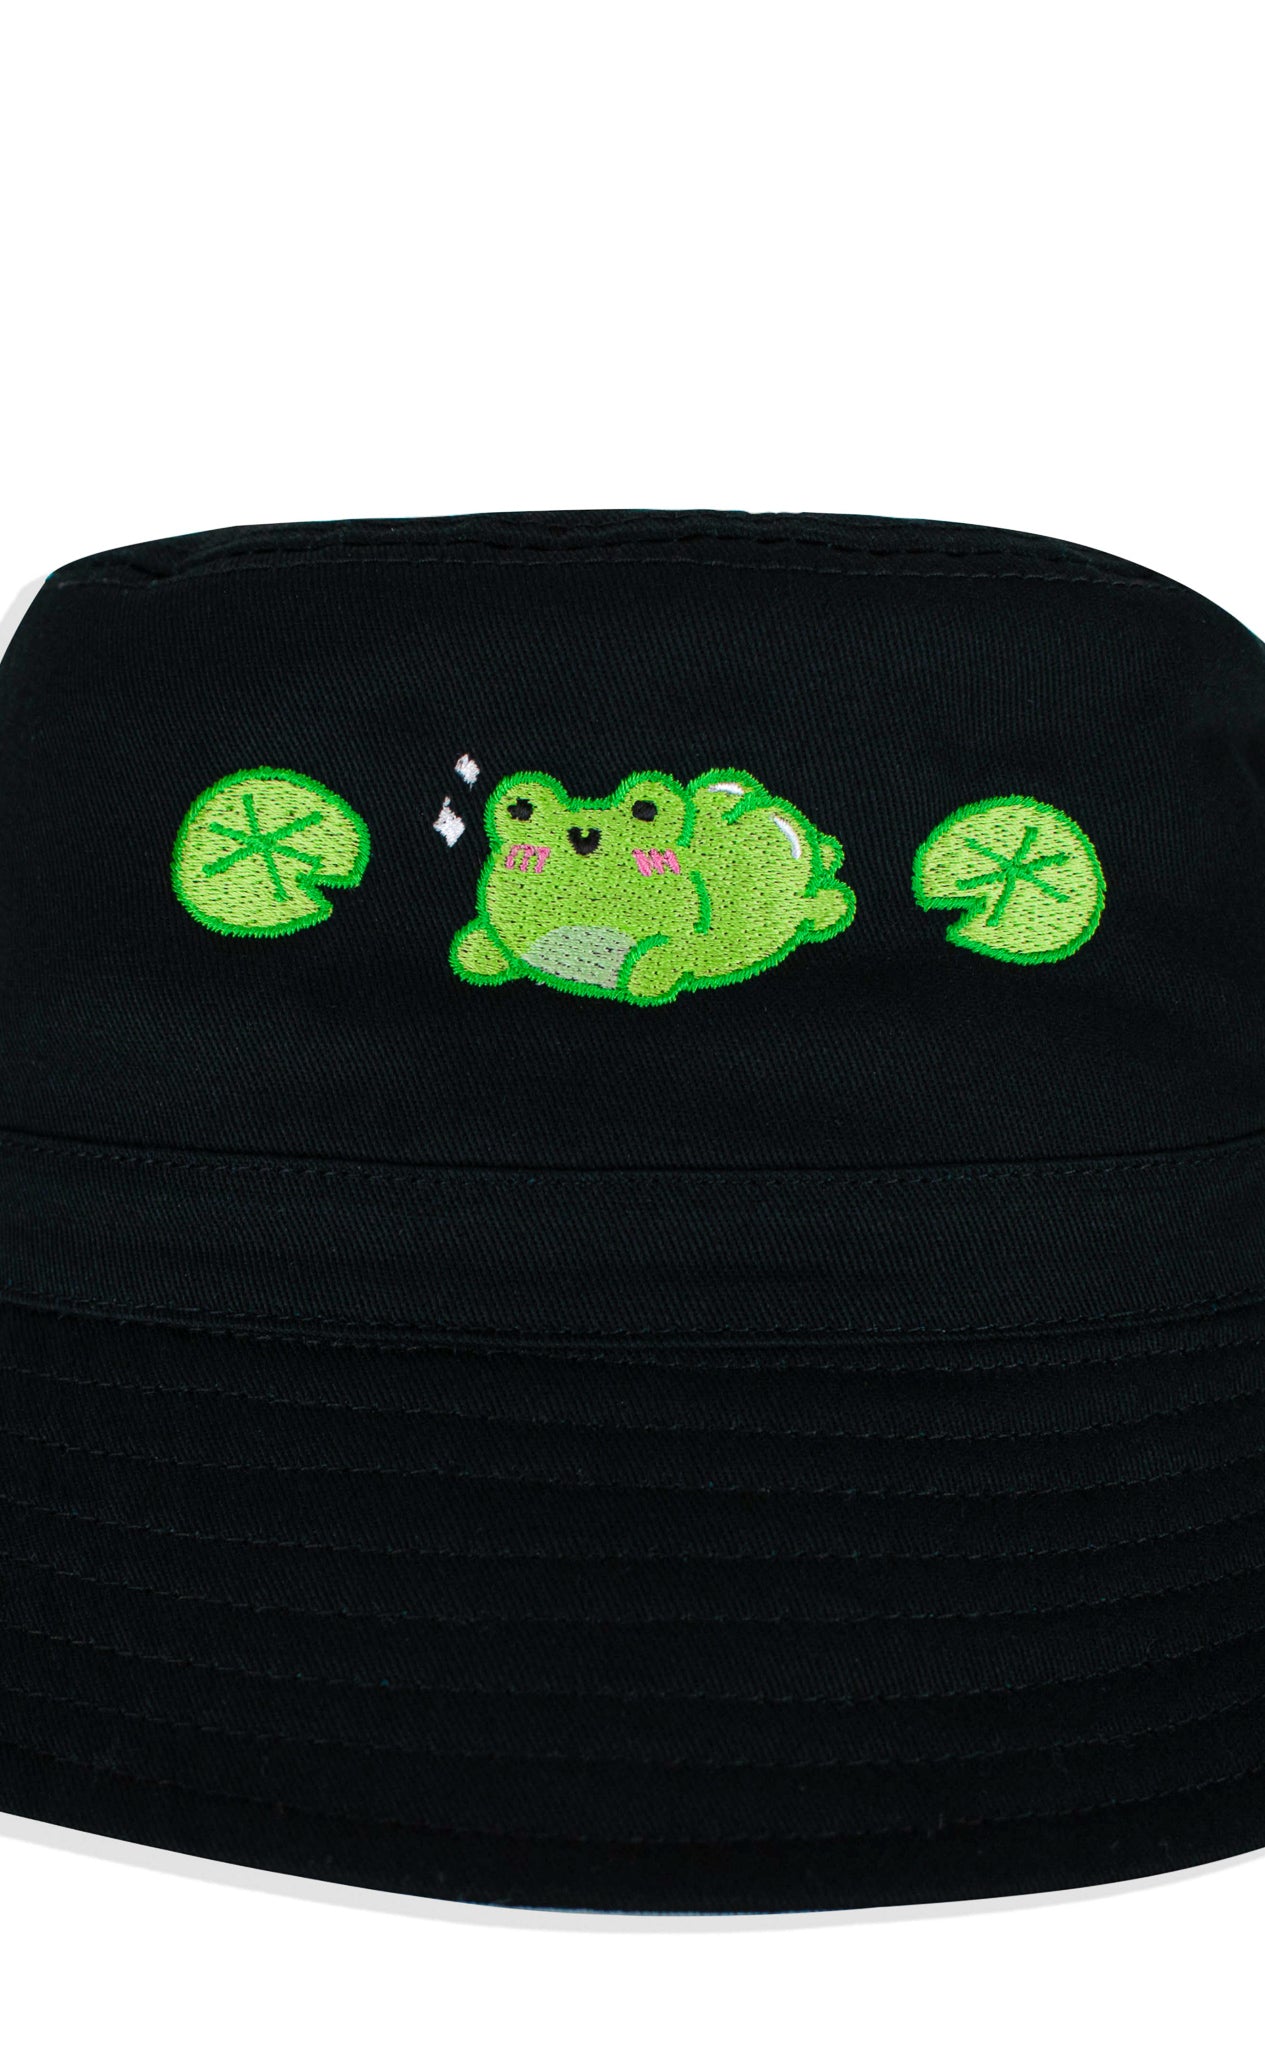 What is Frog Hat for Adult Teens, Cute Frog Bucket Hat, Cotton